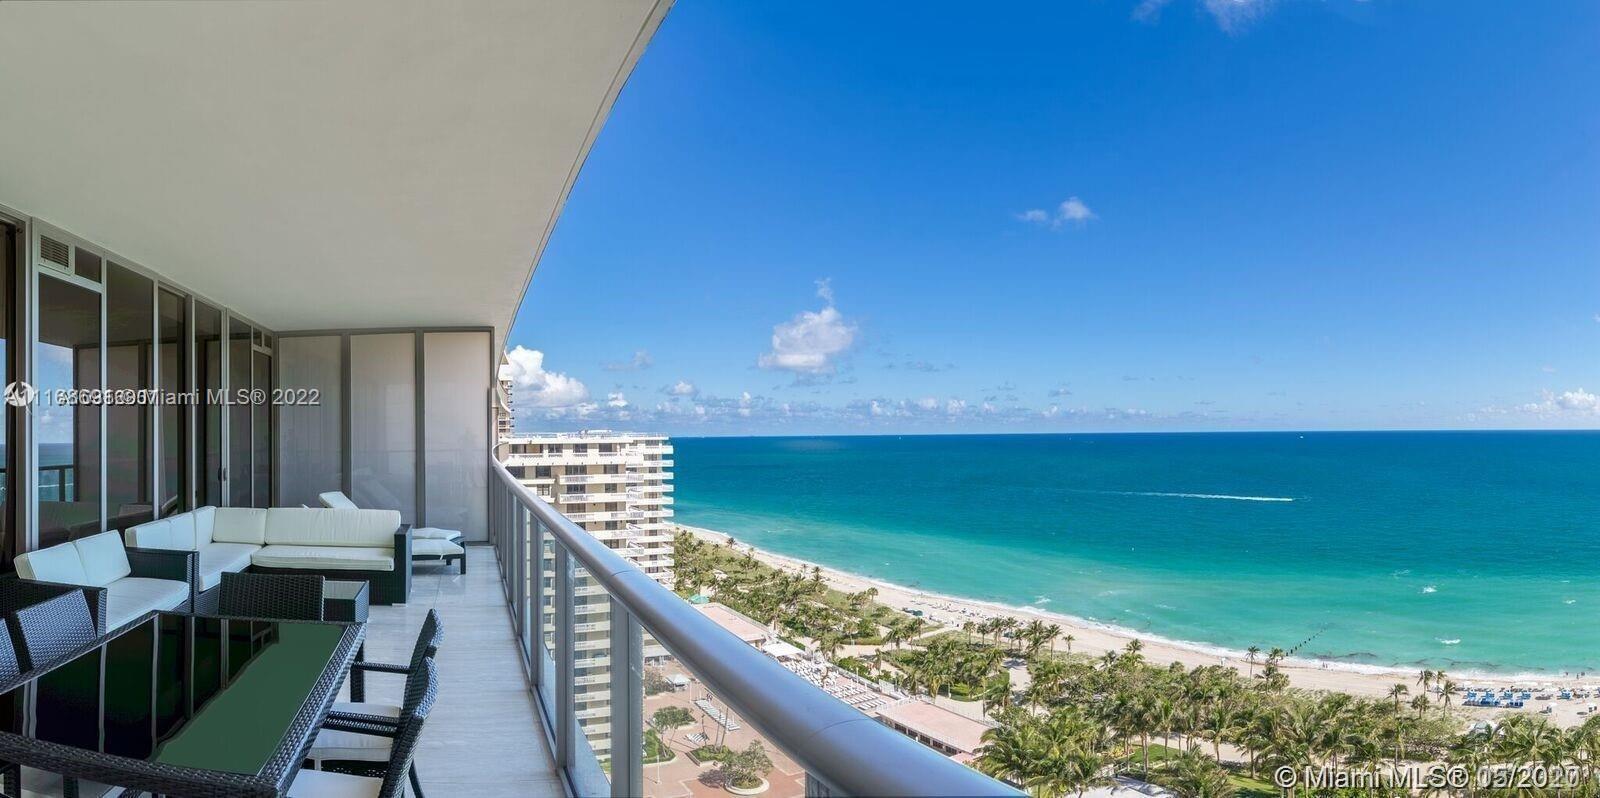 Rental Property at 9705 Collins Ave 1704N, Bal Harbour, Miami-Dade County, Florida - Bedrooms: 2 
Bathrooms: 3  - $20,000 MO.